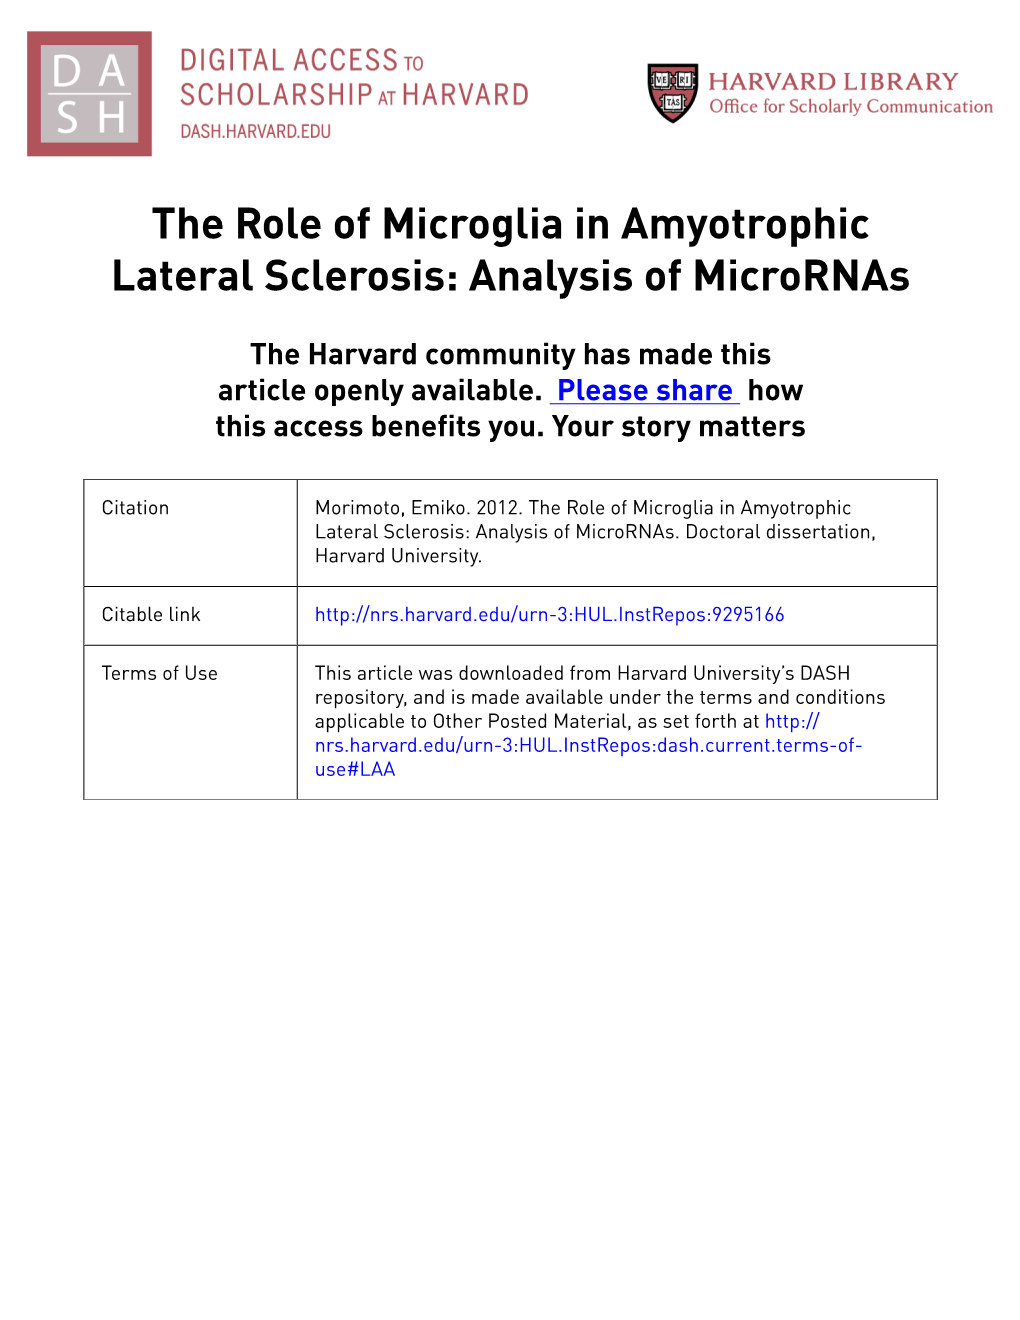 The Role of Microglia in Amyotrophic Lateral Sclerosis: Analysis of Micrornas